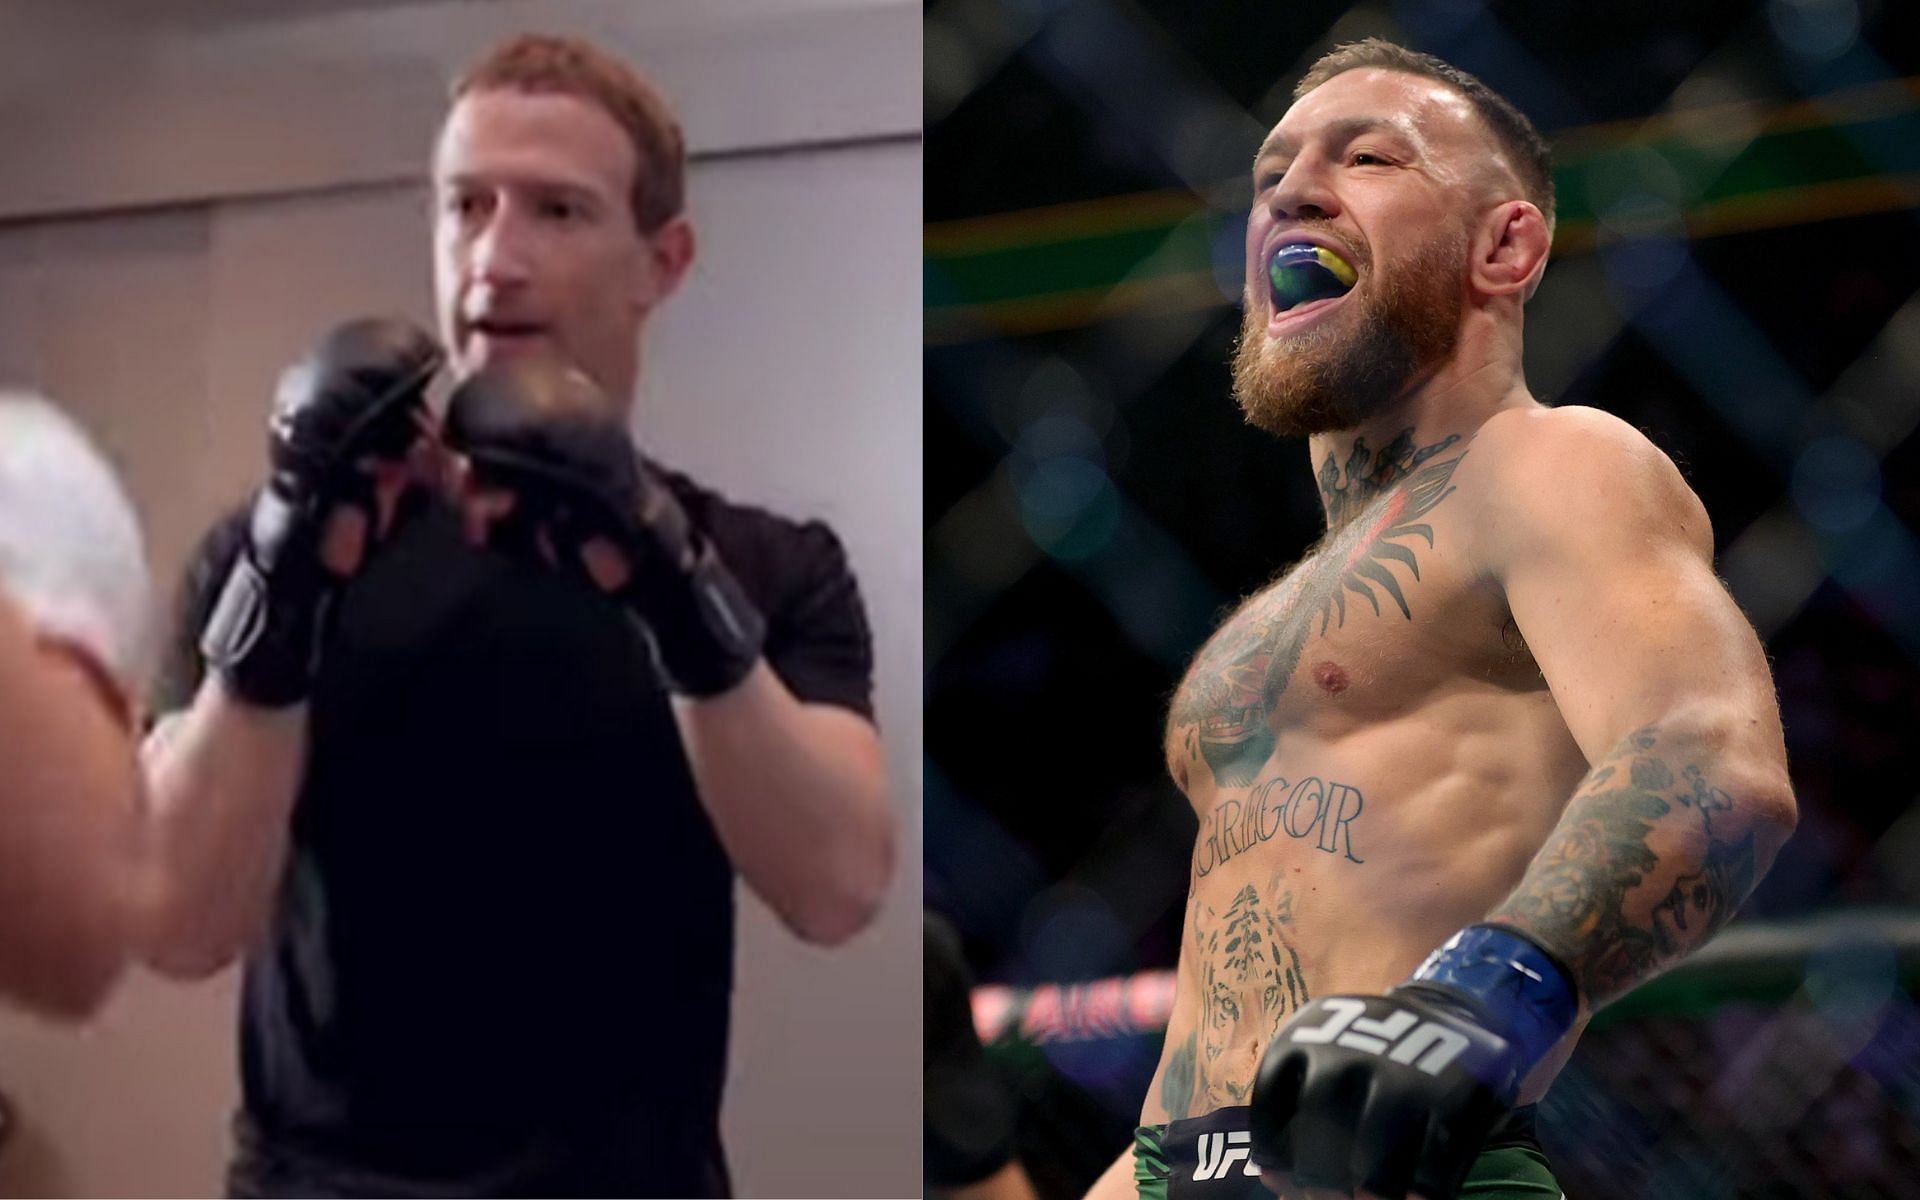 Mark Zuckerberg (left) and Conor McGregor (right). [Images courtesy: left image from Instagram @zuck and right image from Getty Images]